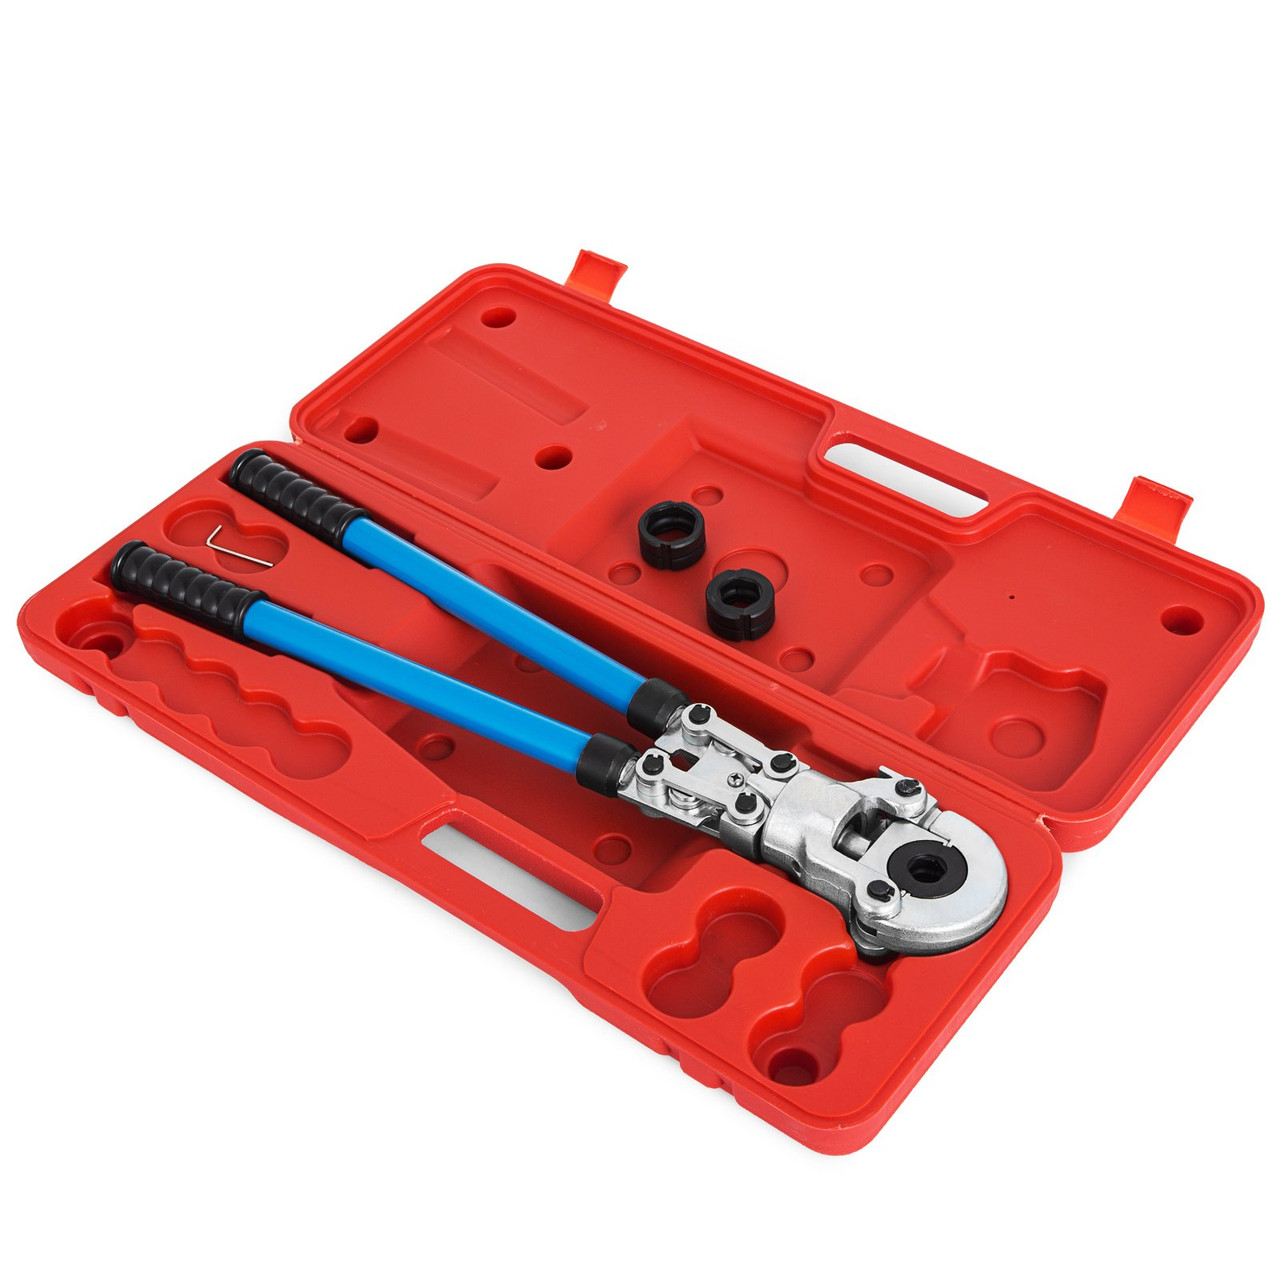 Plumbing Copper Pipe Crimper Press with 1/2" 3/4" 1" Jaws,Copper Tube Fittings Crimping Tool 40CR Steel Material,Pipe Press Copper Crimp Tool Suitable for Copper Fittings and Copper Joints etc